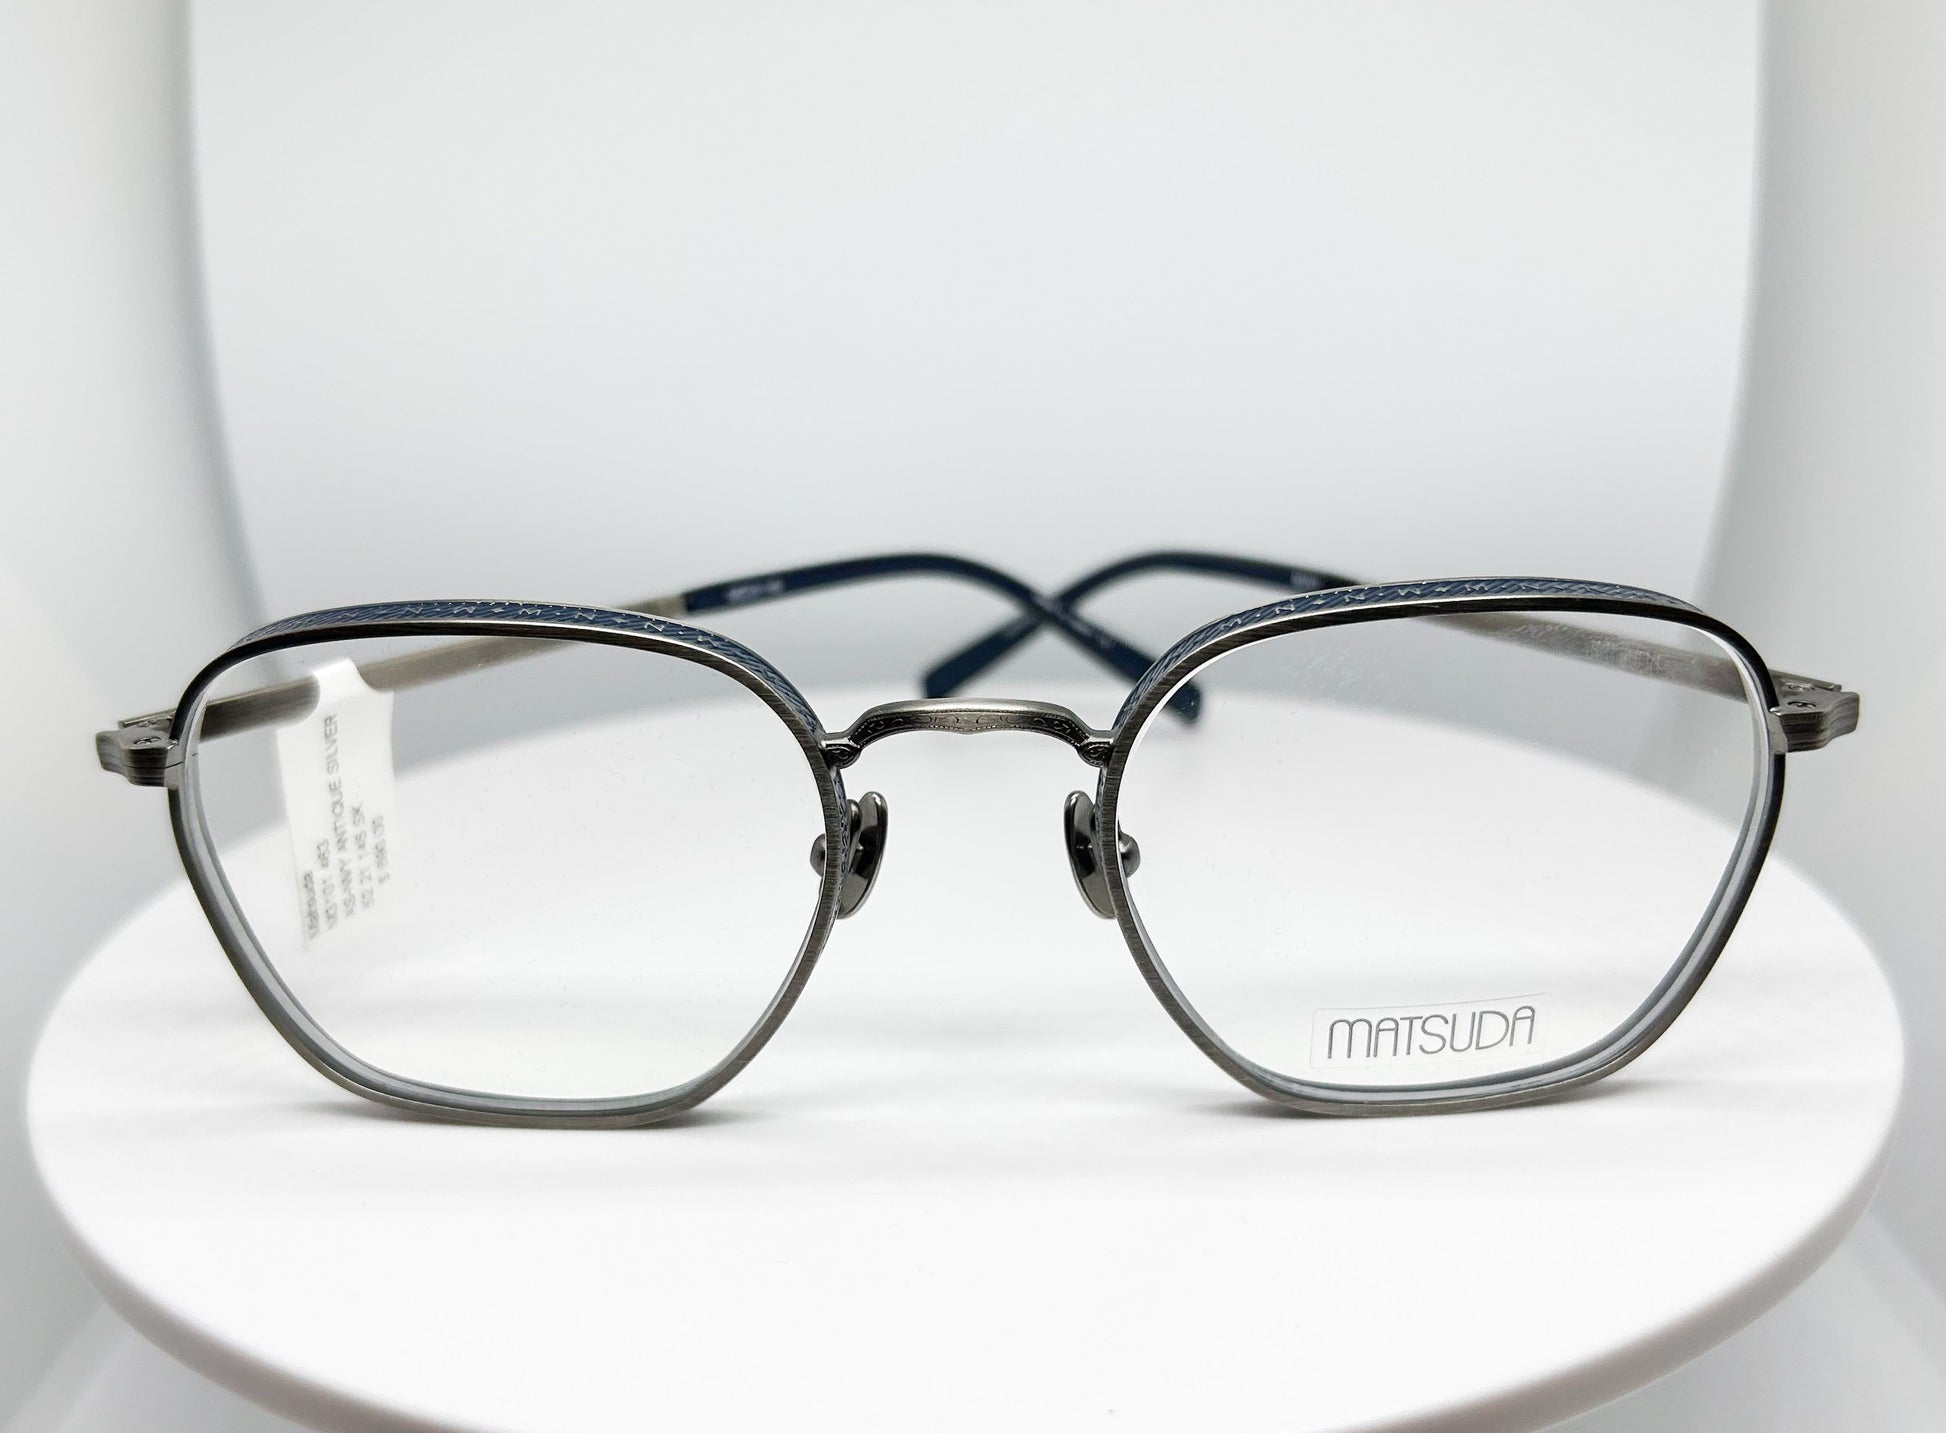 <p>Matsuda M3101 is a  Navy, Antique Silver, Metal Optical Frame with a Round shape.</p><p>Shop with confidence from Adair Eyewear, a MATSUDA Authorized Dealer.  We have provided the best in customer service and great designer eyweear for over 40 years.</p>